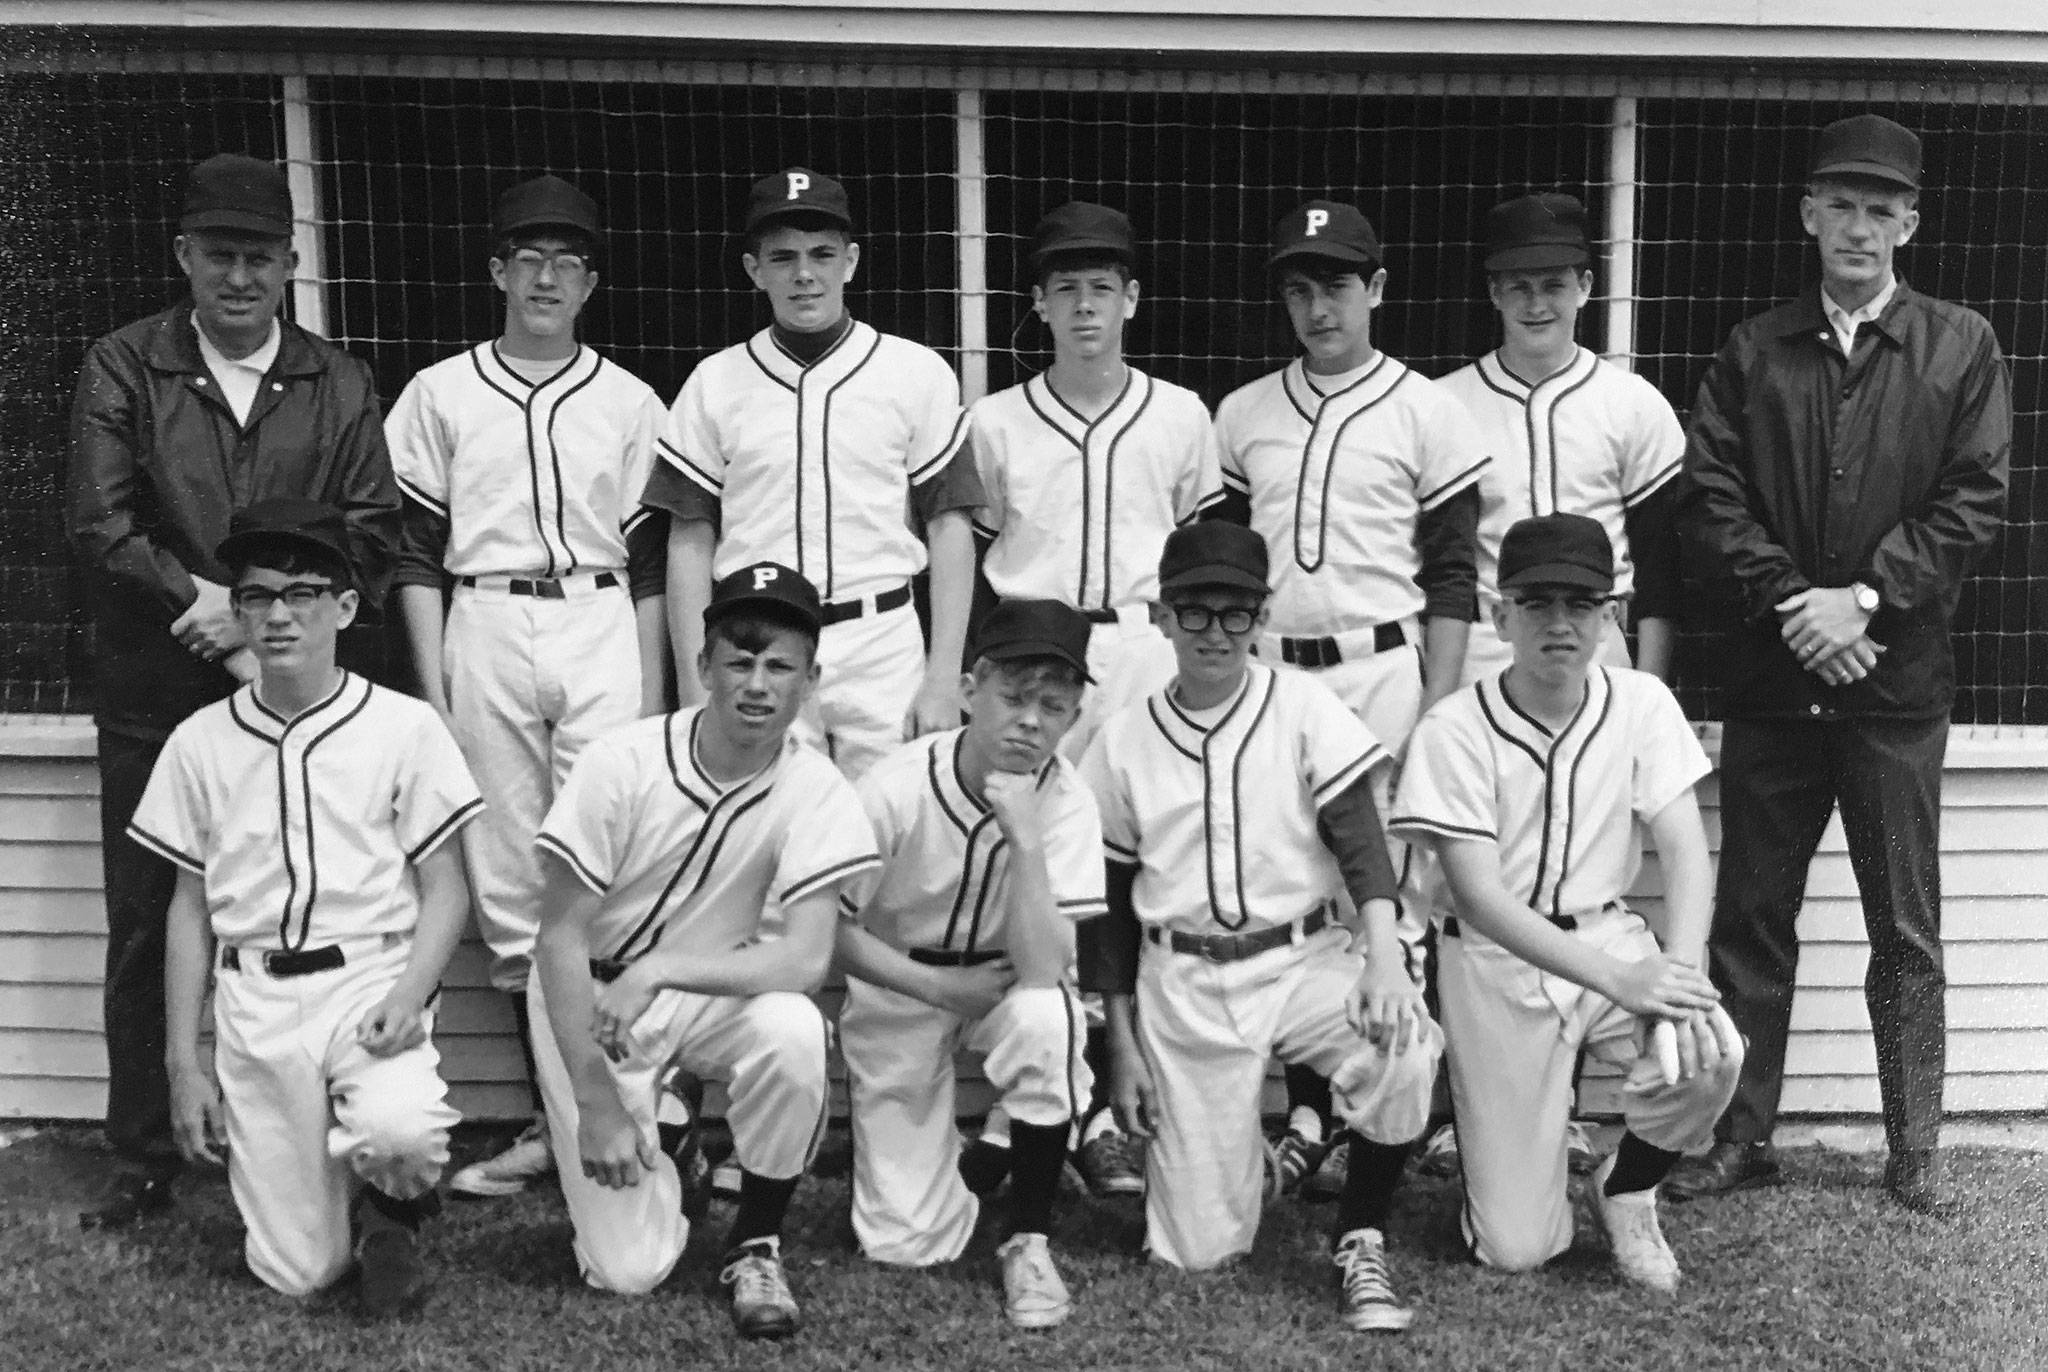 The Pirates of the 1967 Oak Harbor Mustang League finished the season with a 12-3 record. Back row, left to right: assistant coach Jim Allen, Craig Cross, Jim Waller, John Kjargaard, Rob Valdez, Tim Quinn, head coach Mert Waller. Front row, left to right: Doug Rowand, Randy Allen, Jeff Ford, Marc Goetz, Craig Dougherty. (Photo provided)